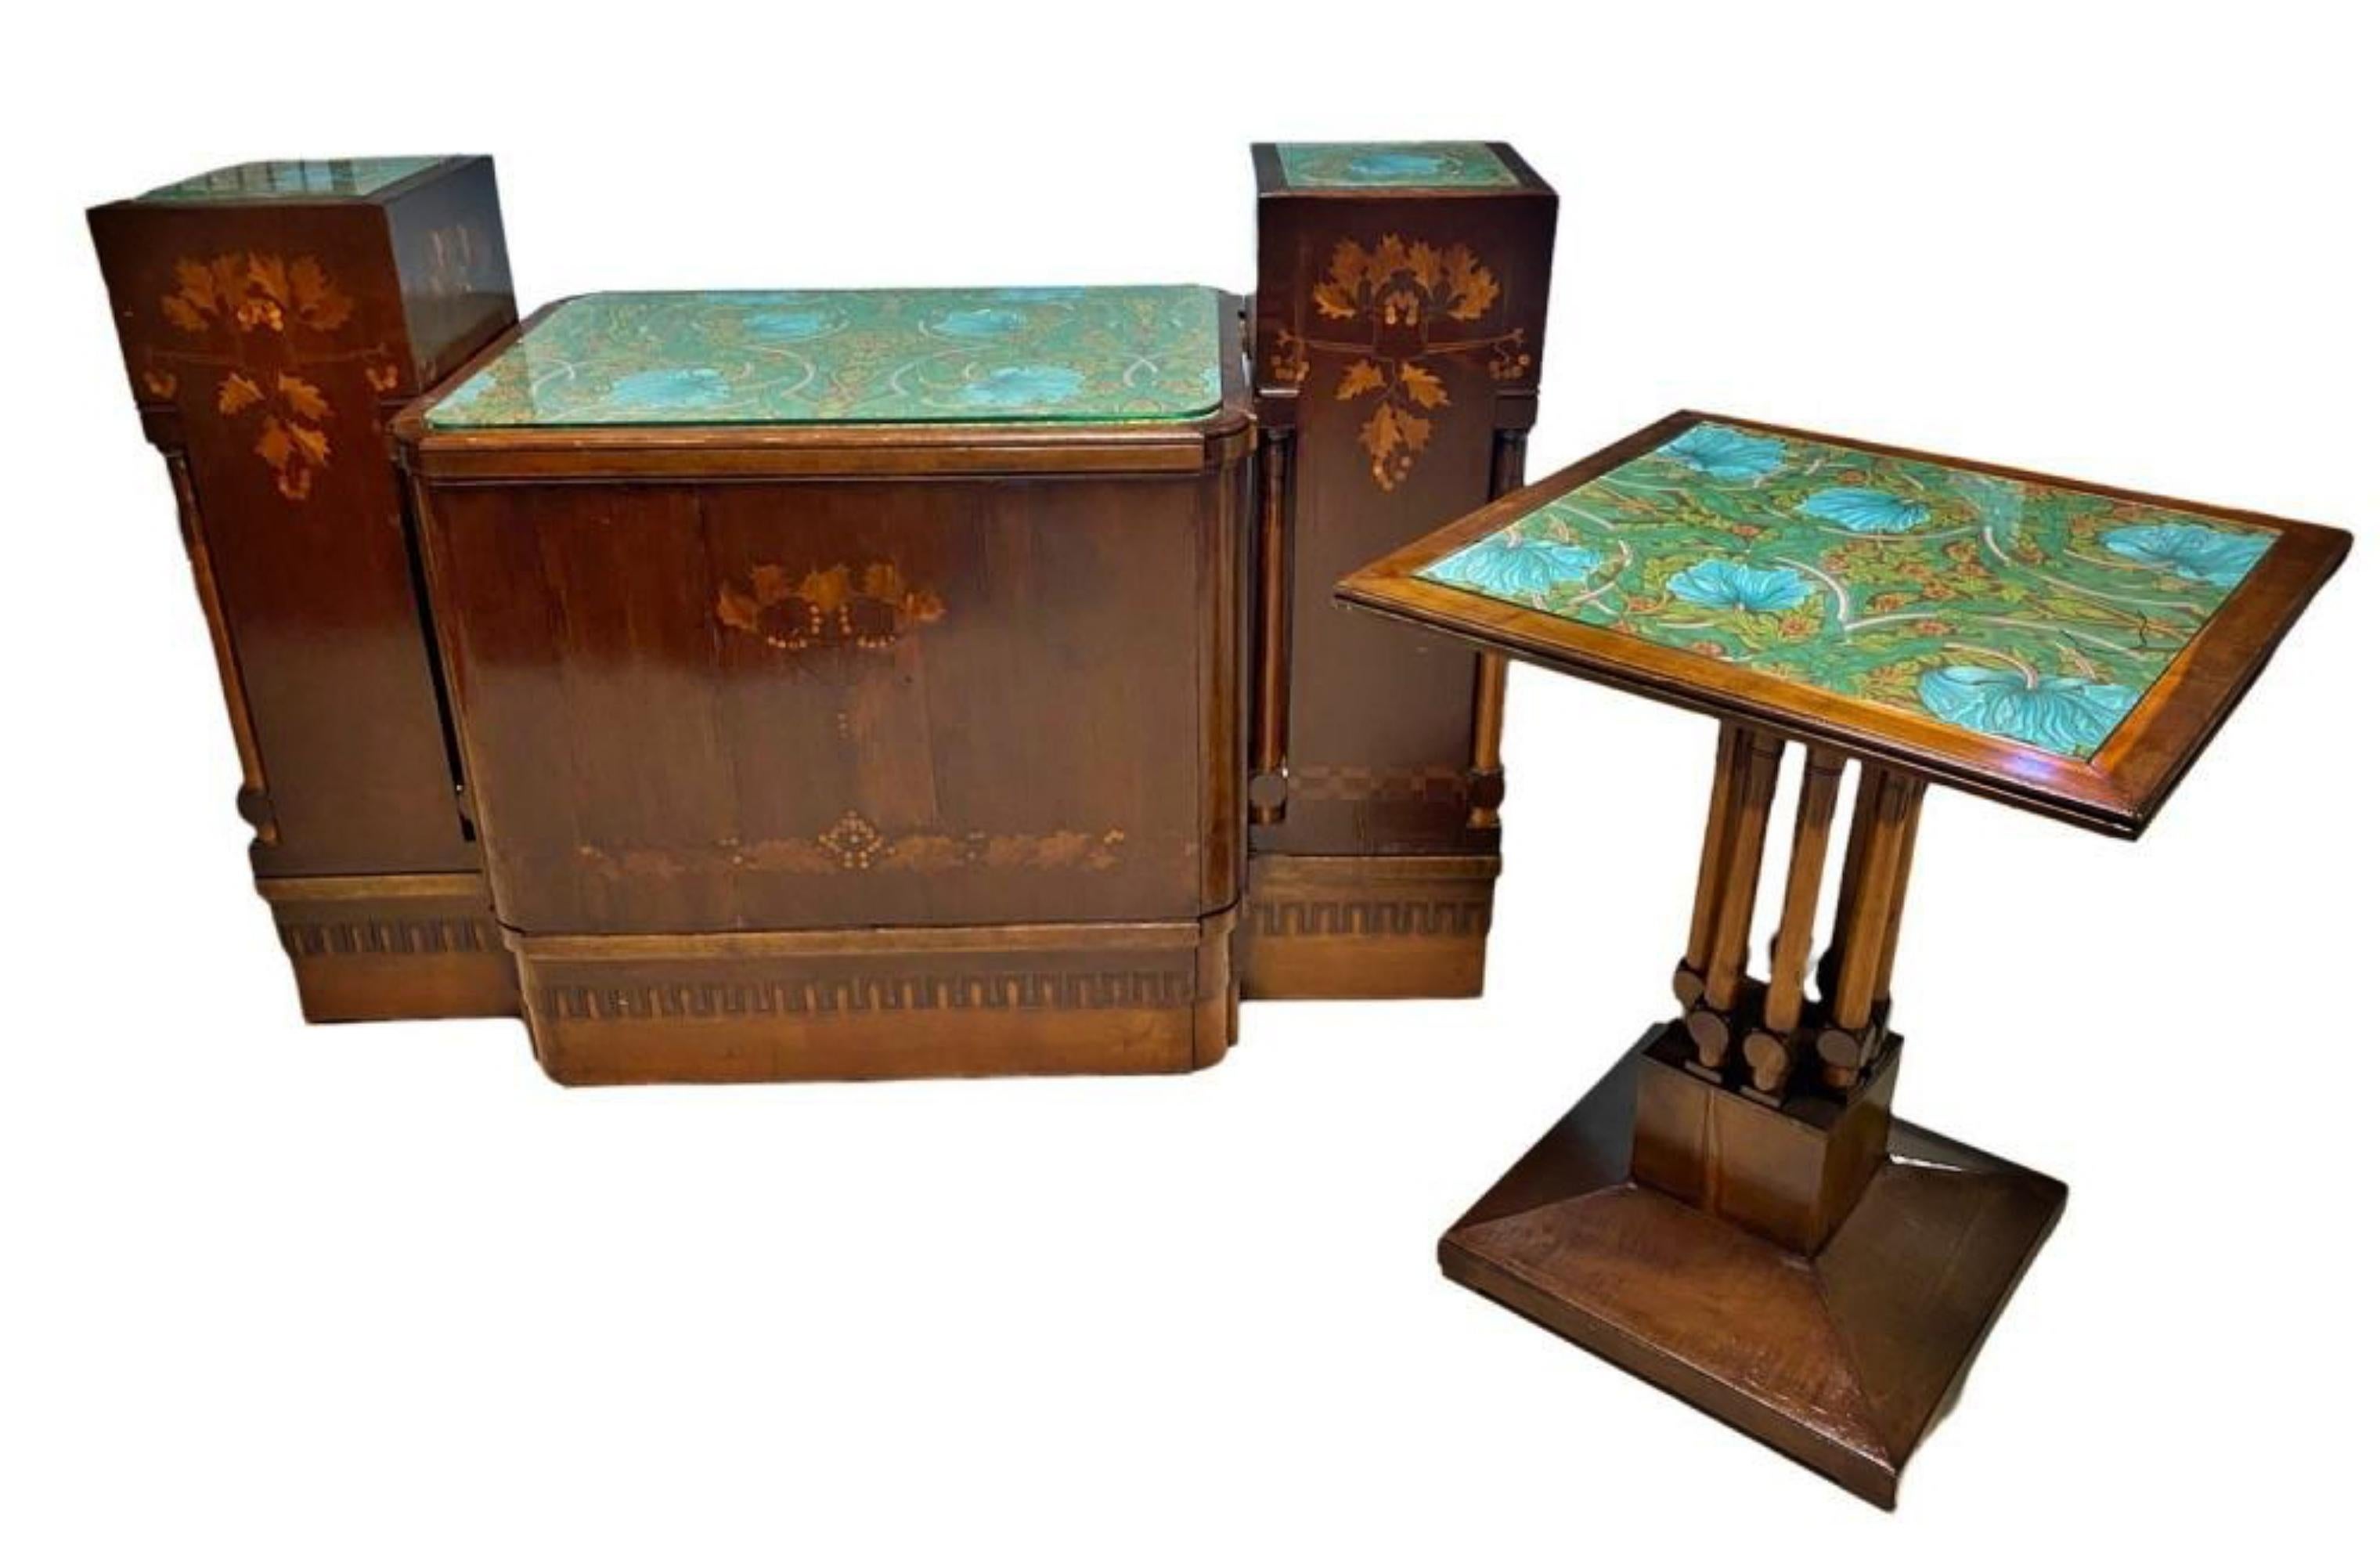 Art Deco Eugenio Quarti 1867-1929 Desk With Twin Table Decorated with Floral Inlays